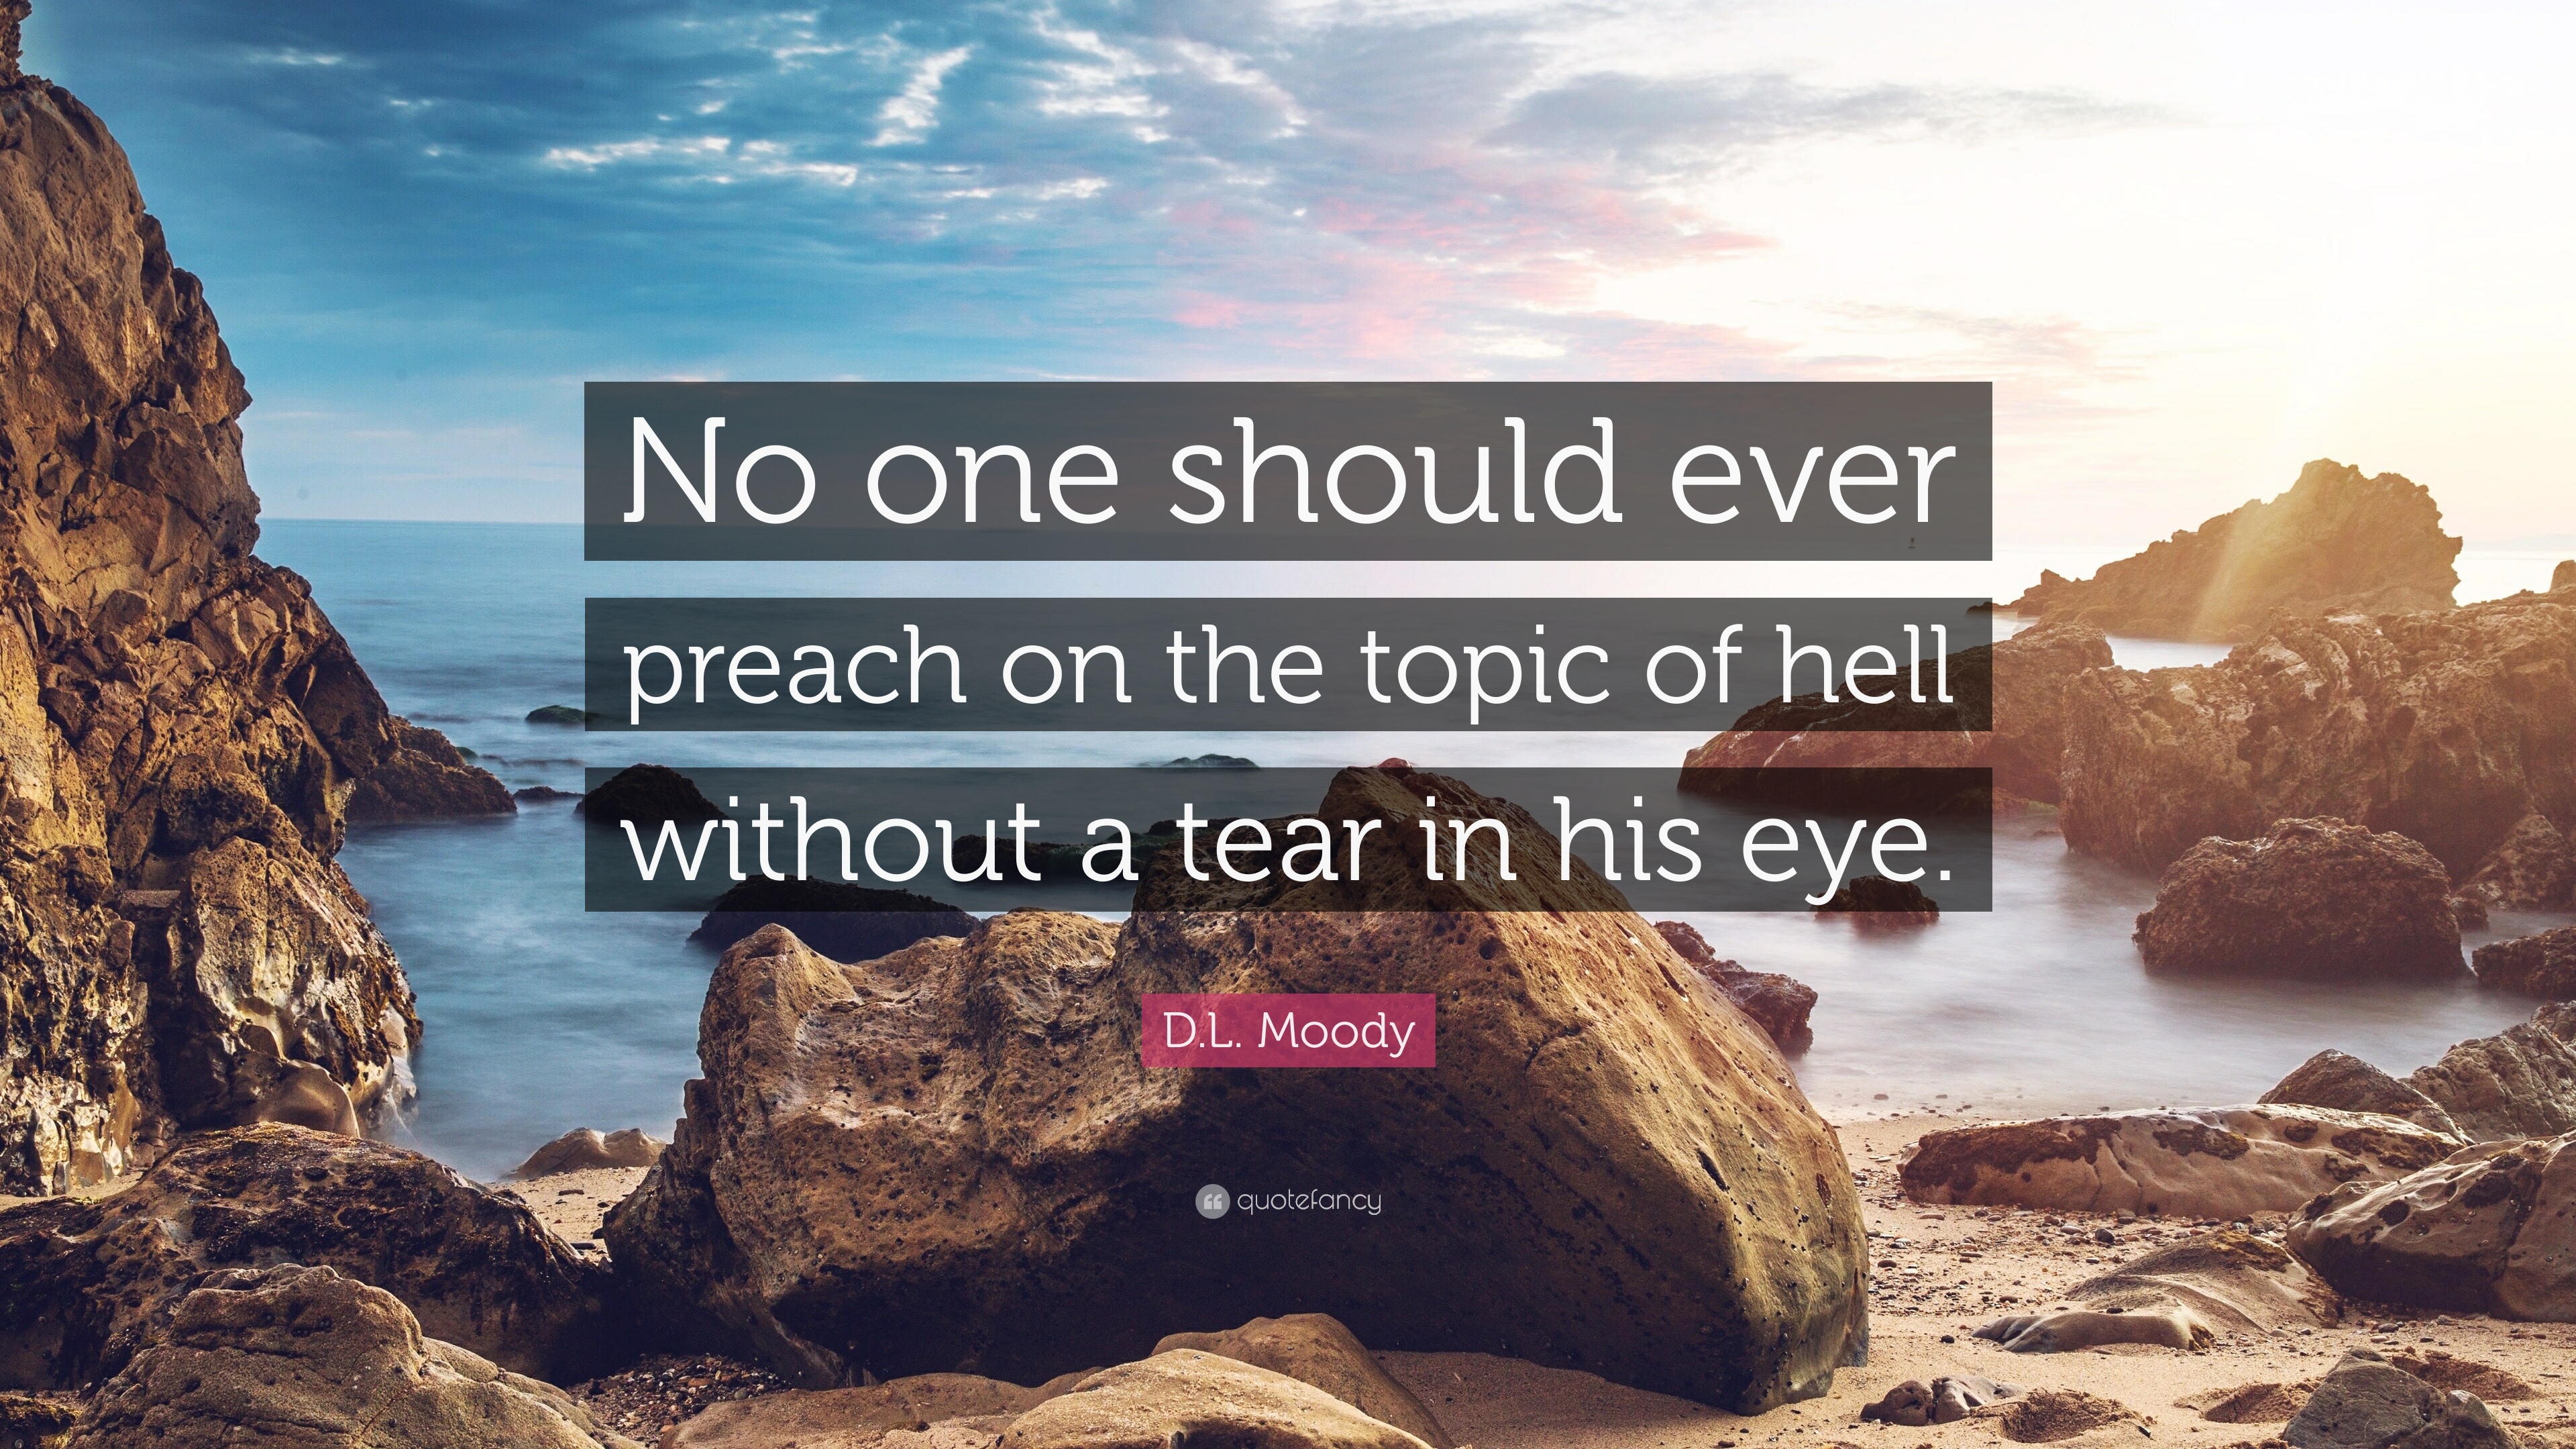 1877584-D-L-Moody-Quote-No-one-should-ever-preach-on-the-topic-of-hell.jpg